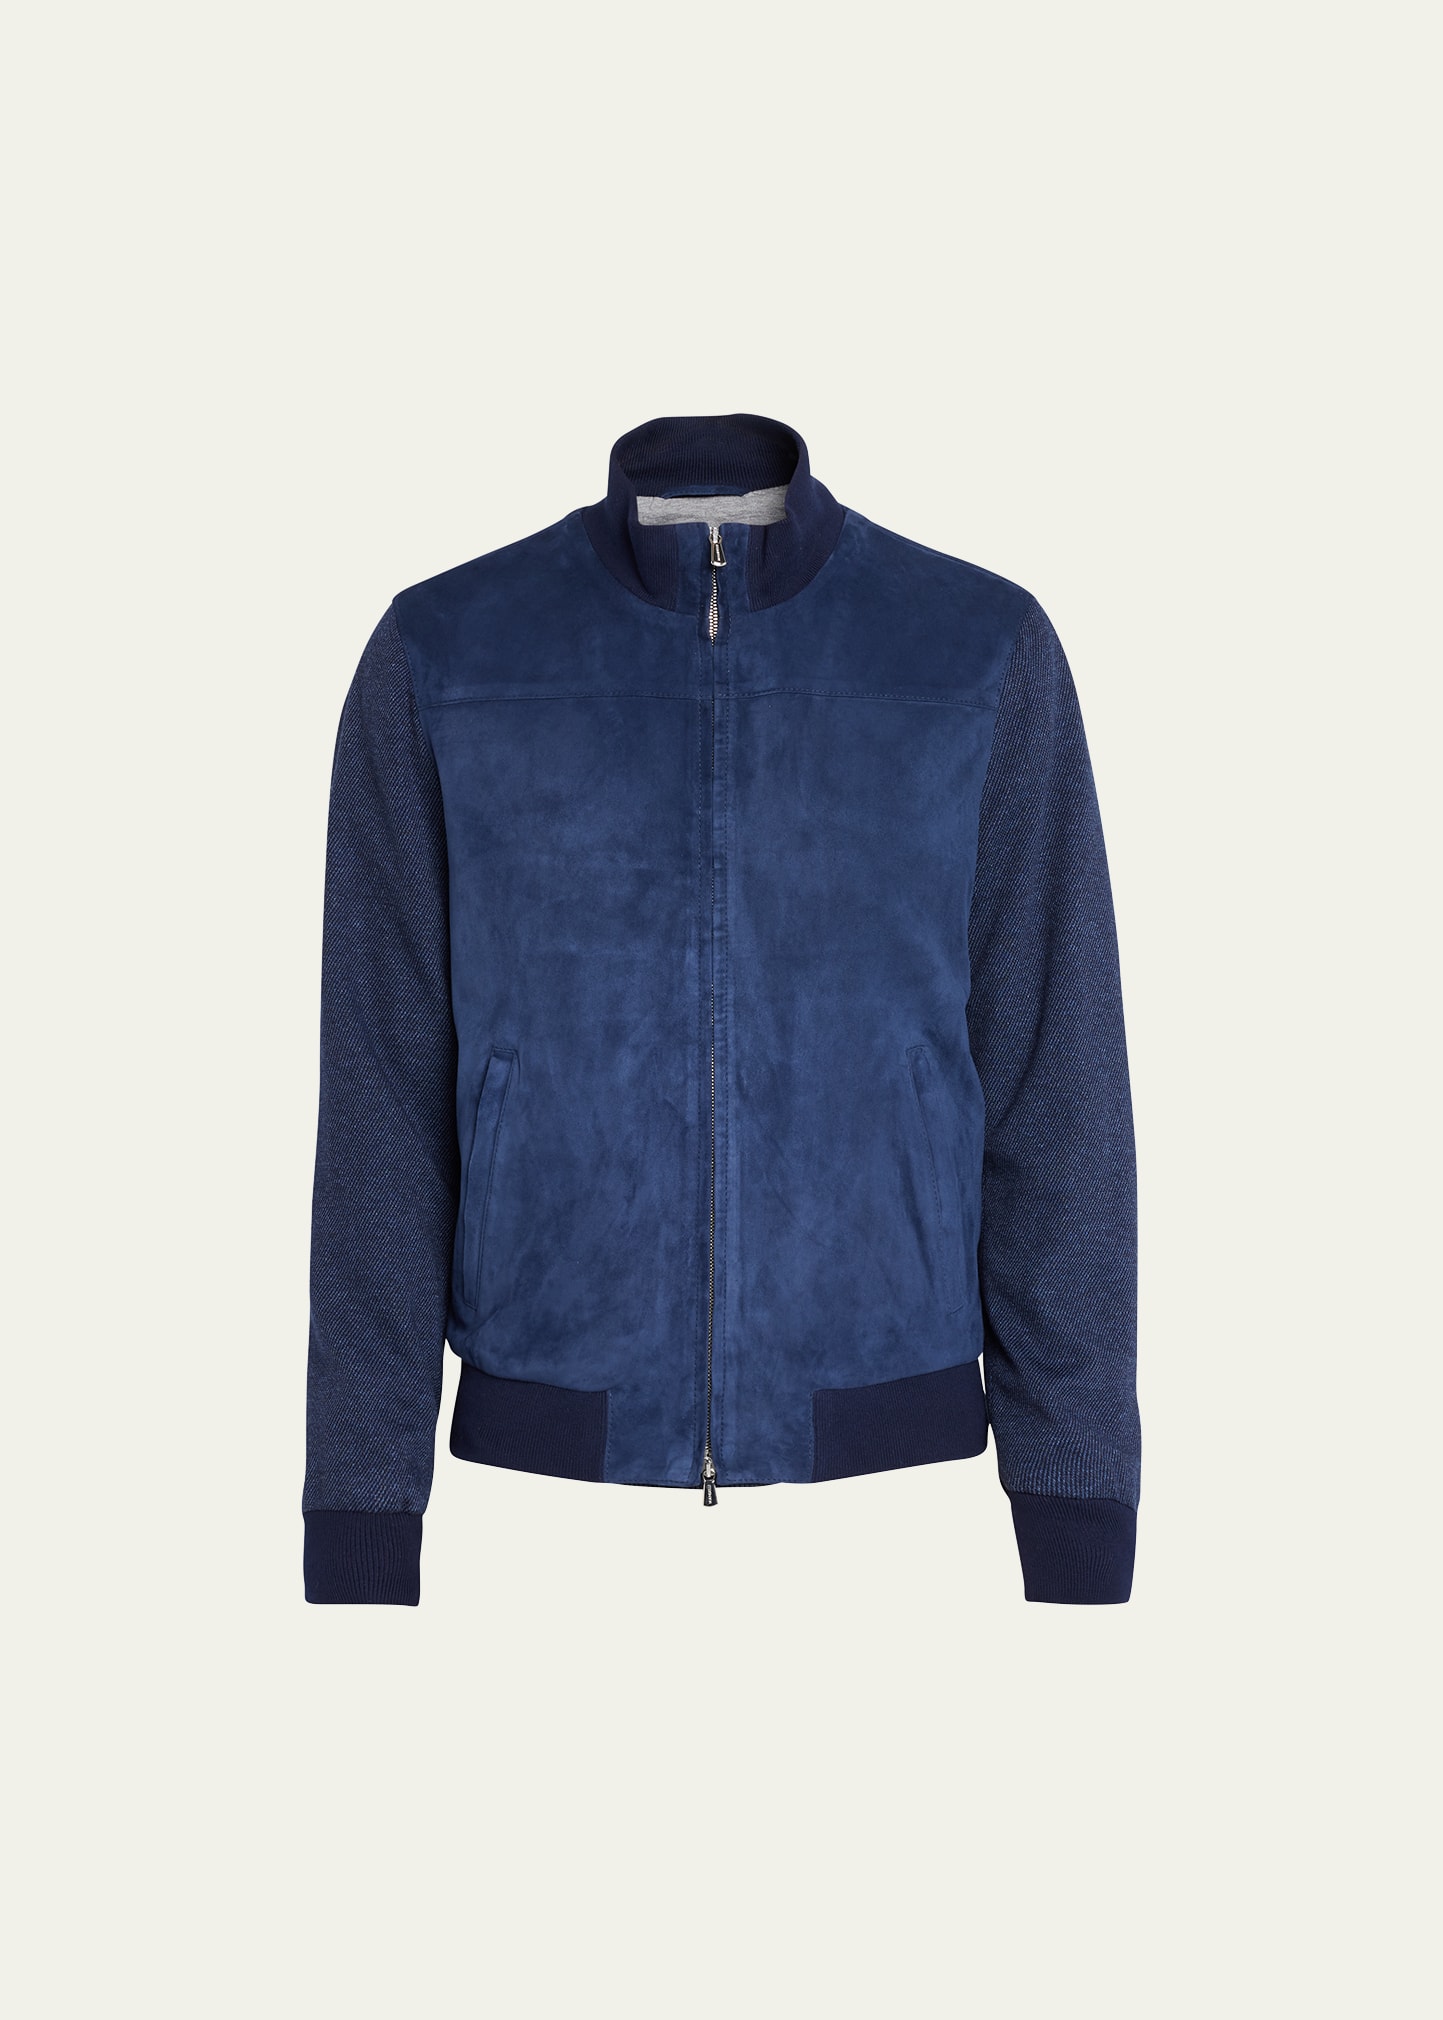 Men's Suede Bomber Jacket with Knit Sleeves